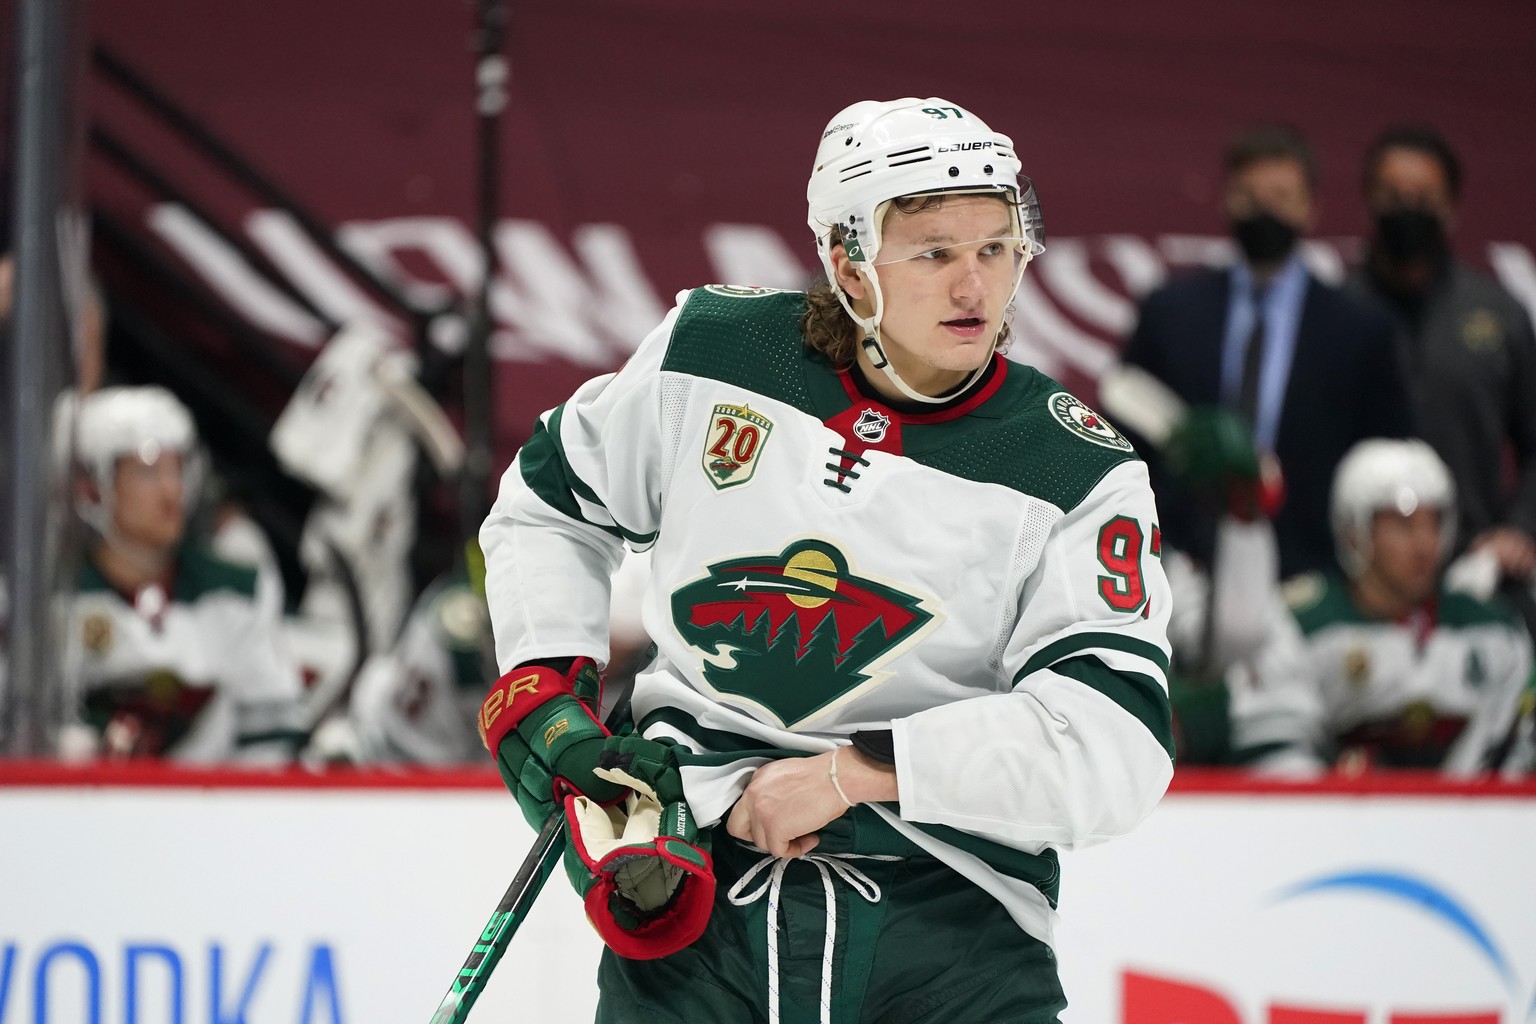 Minnesota Wild left wing Kirill Kaprizov waits for a face off against the Colorado Avalanche in the second period of an NHL hockey game Thursday, March 18, 2021, in Denver. (AP Photo/David Zalubowski) ...